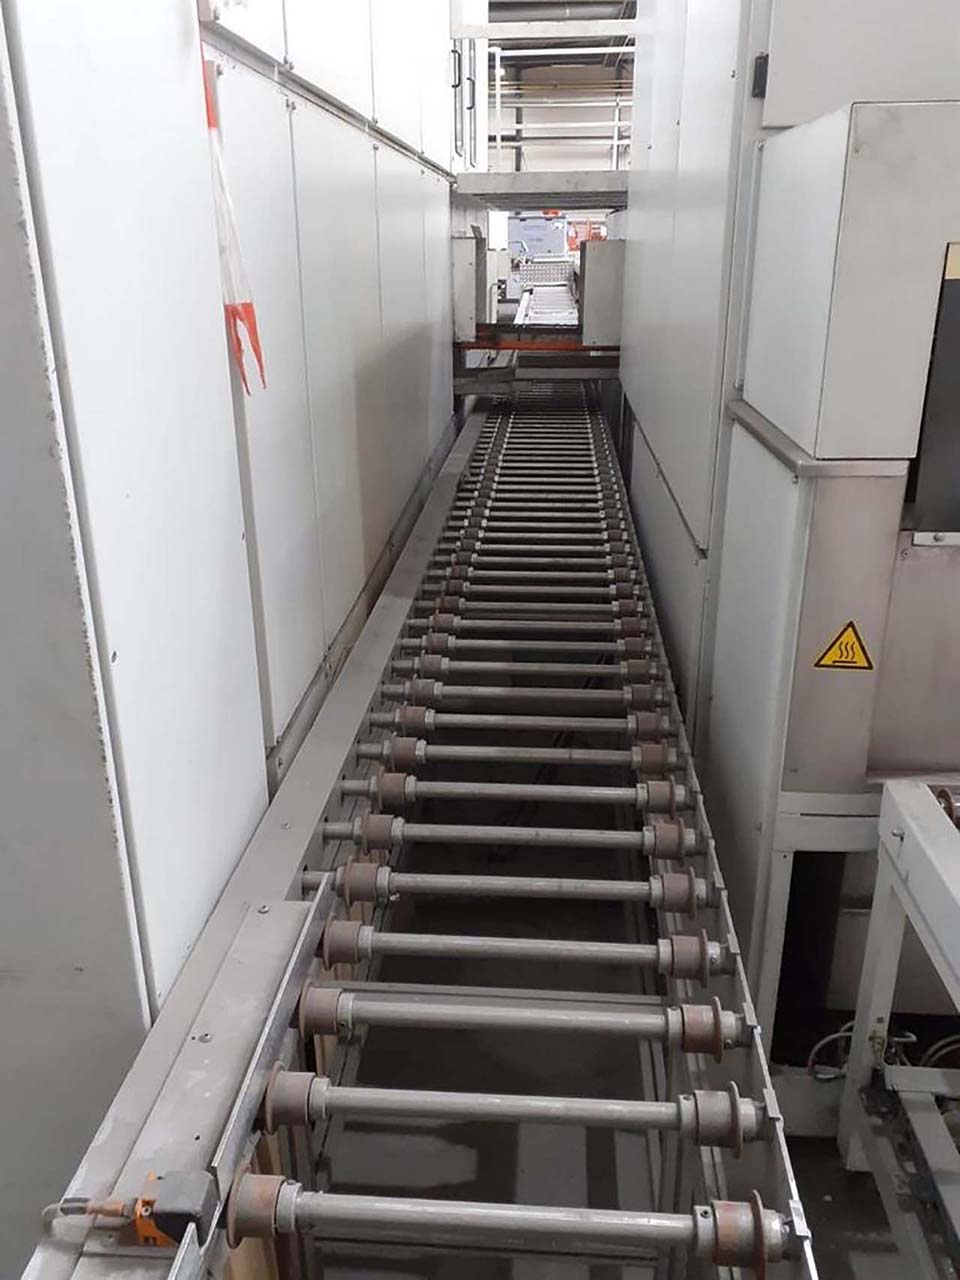 Karl Roll cleaning system ZU2150, used